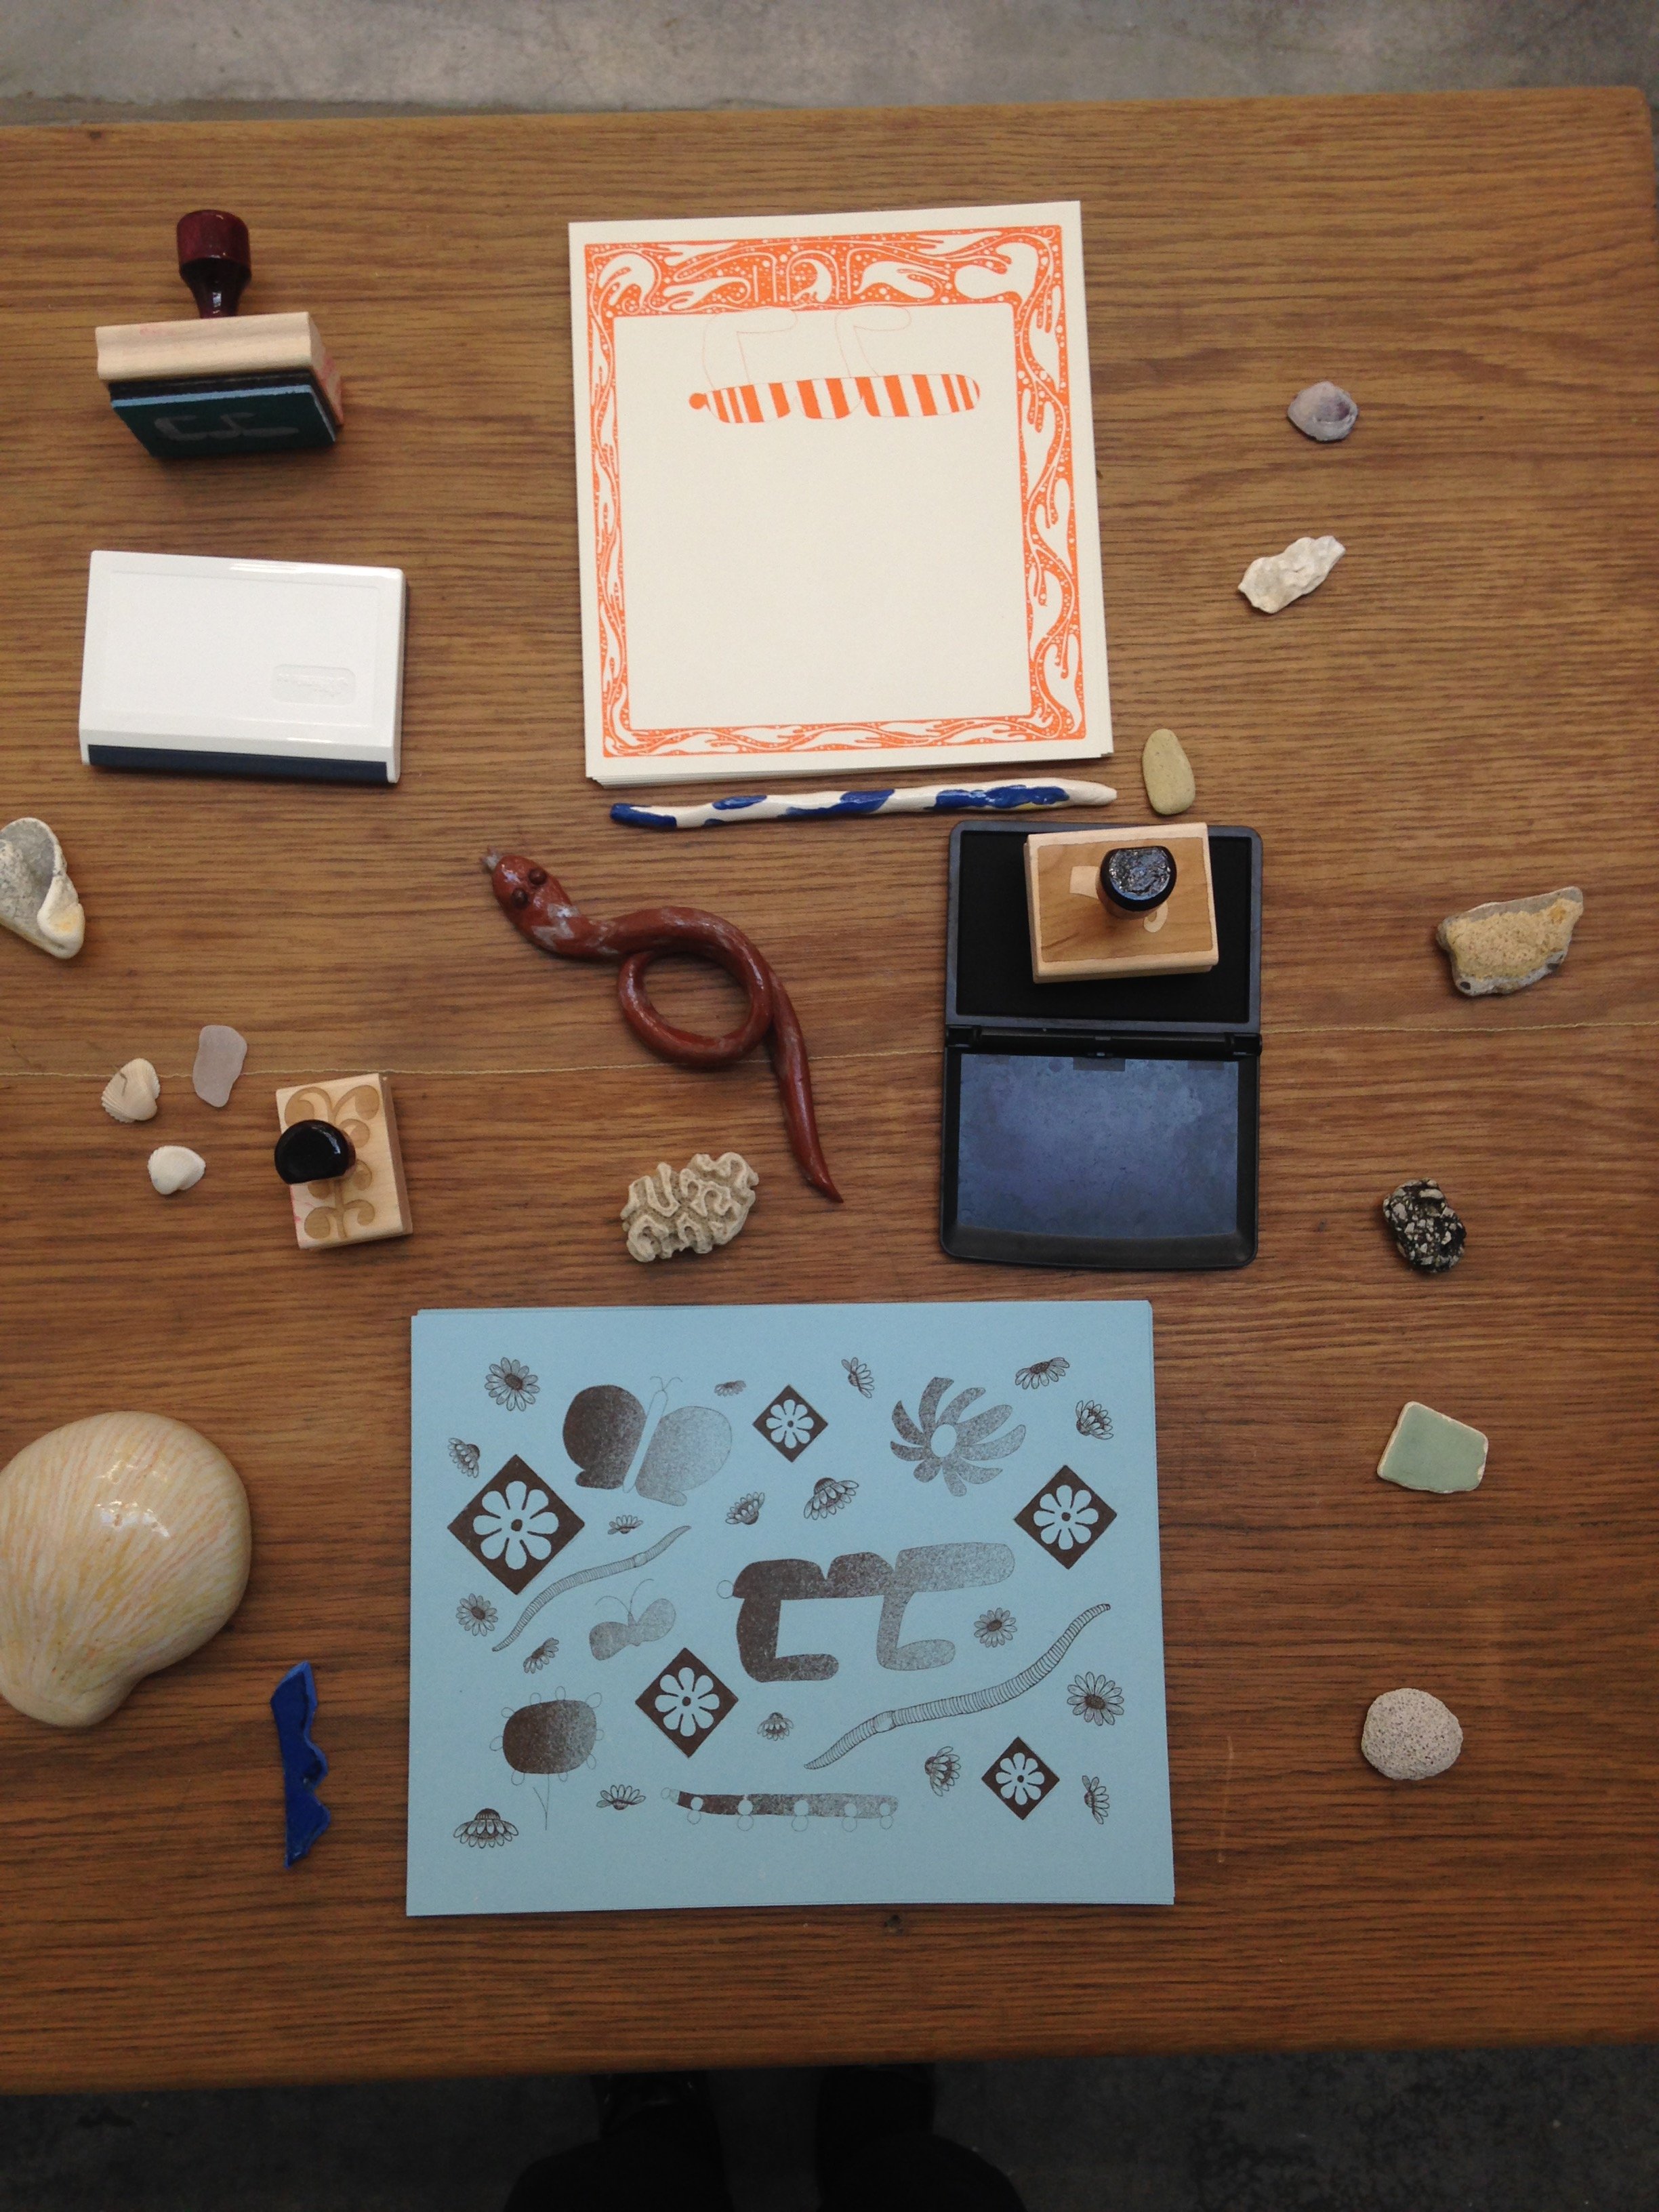  On some faraway beach  Collaboration with Eunice Luk  Screenprinted wallpaper, bugs video installation, rubber stamps, stamp pads, free risograph art prints, ceramics, mesh netting, found stones, vegetation and shells  at Emily Carr University for V